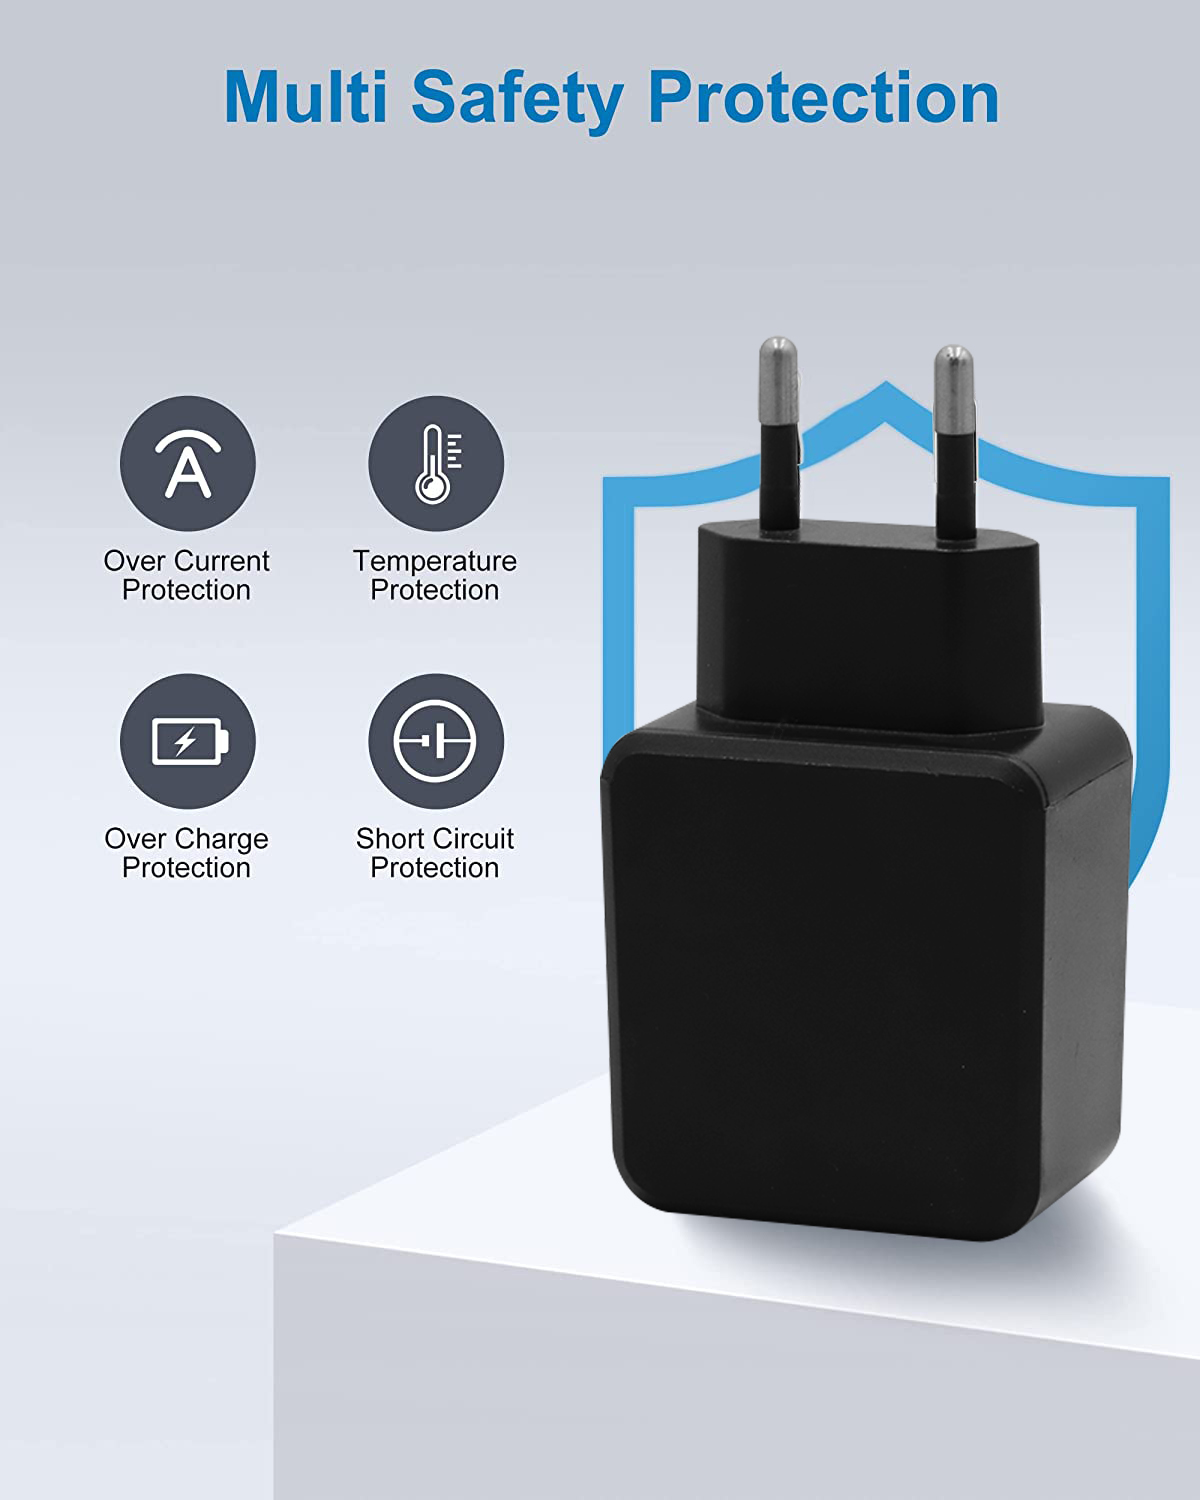 1. LM-3400 Dual USB Wall Charger Bulk Purchase and Corporate purchase from China Union Power -Description-